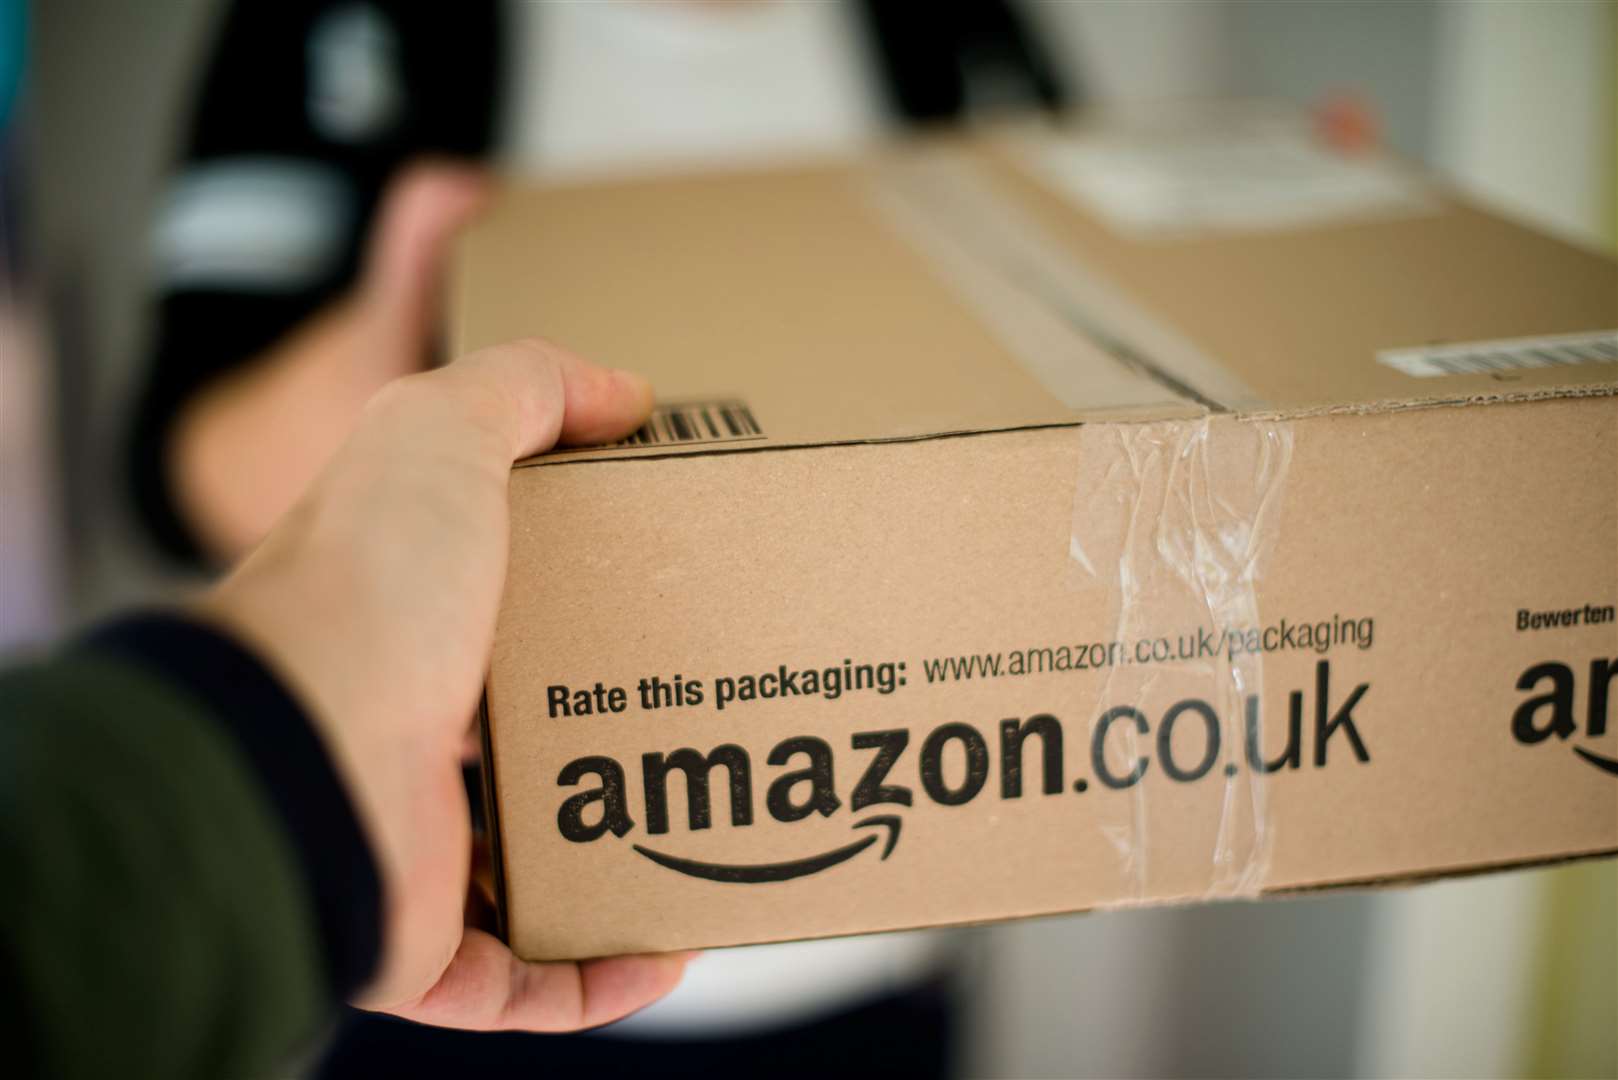 Amazon is alerting customers to the dangers via email. Image: iStock.